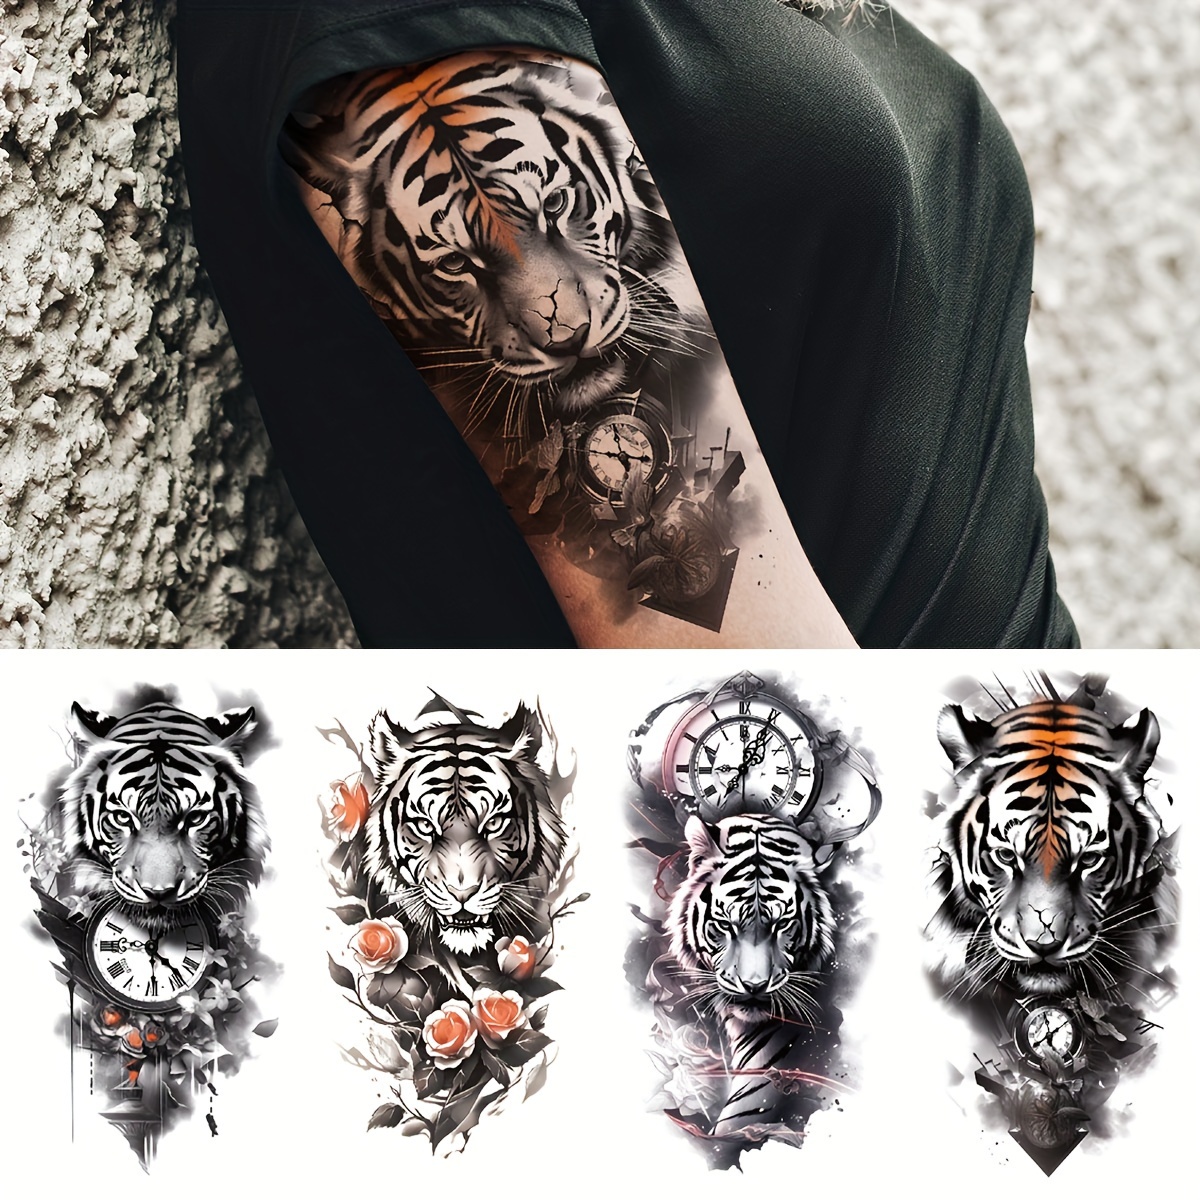 

4pcs Tattoo Stickers Set, Half Sleeve Black Tiger Clock Flowers Pattern Temporary Tattoo For Men Women, Sustainable For 3-7 Days, Body Art Decal Fake Tattoo